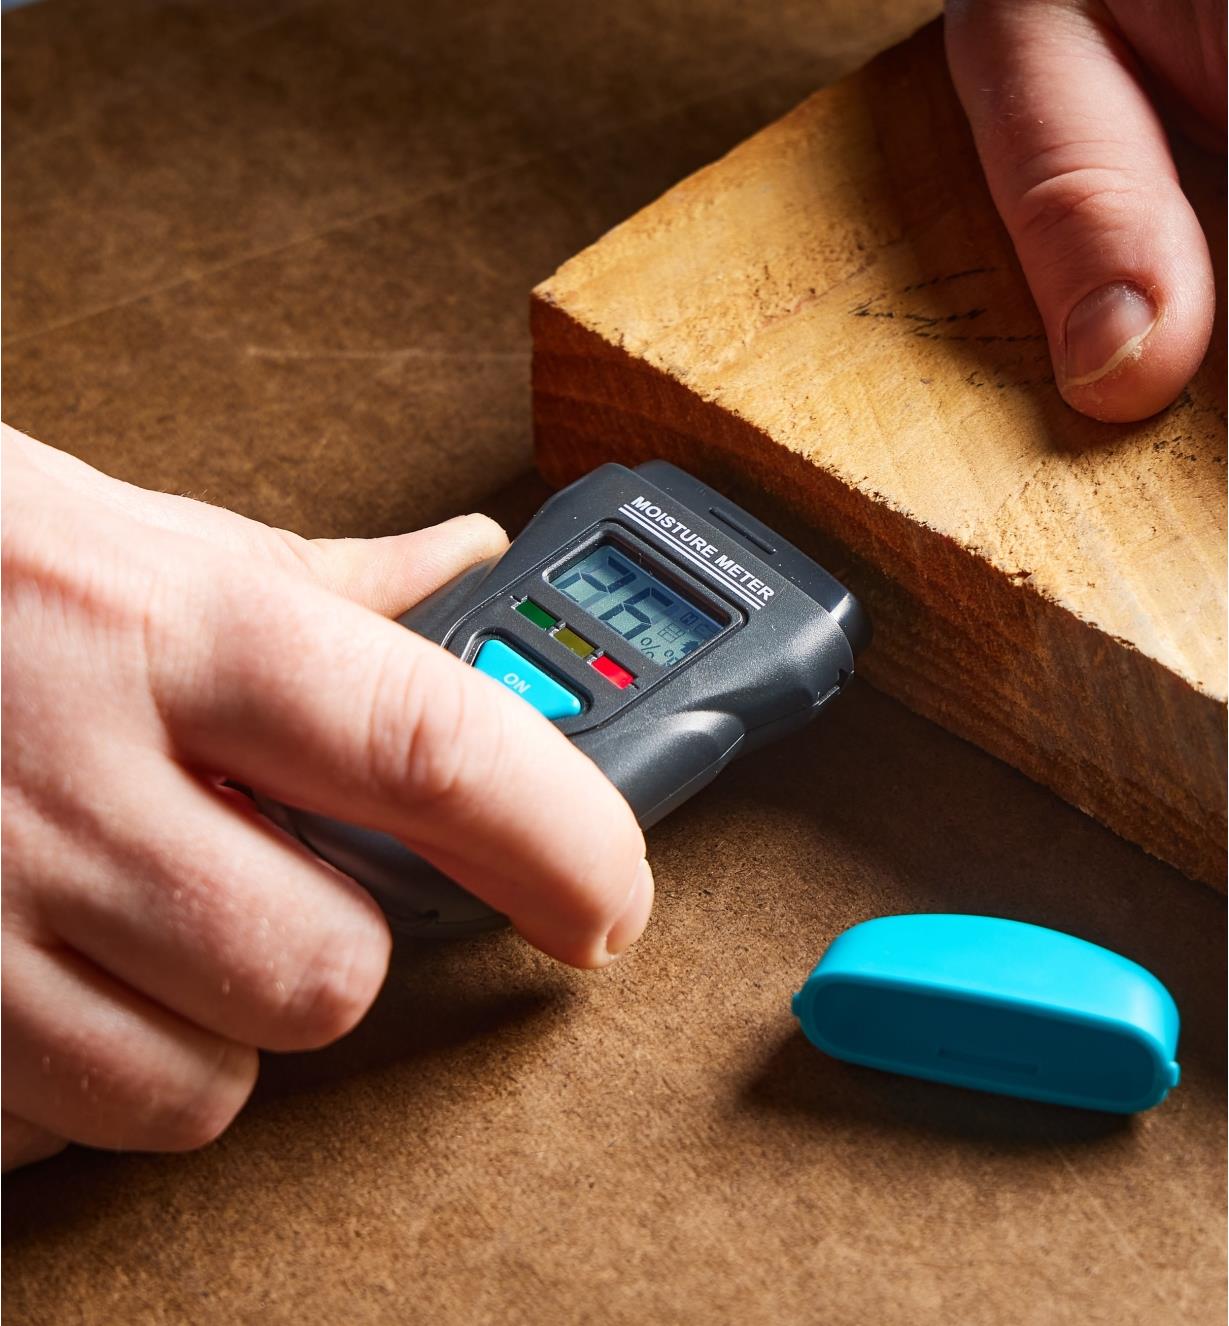 The Digital Moisture Meter being pressed into wood, showing a high reading and red LED indicator.